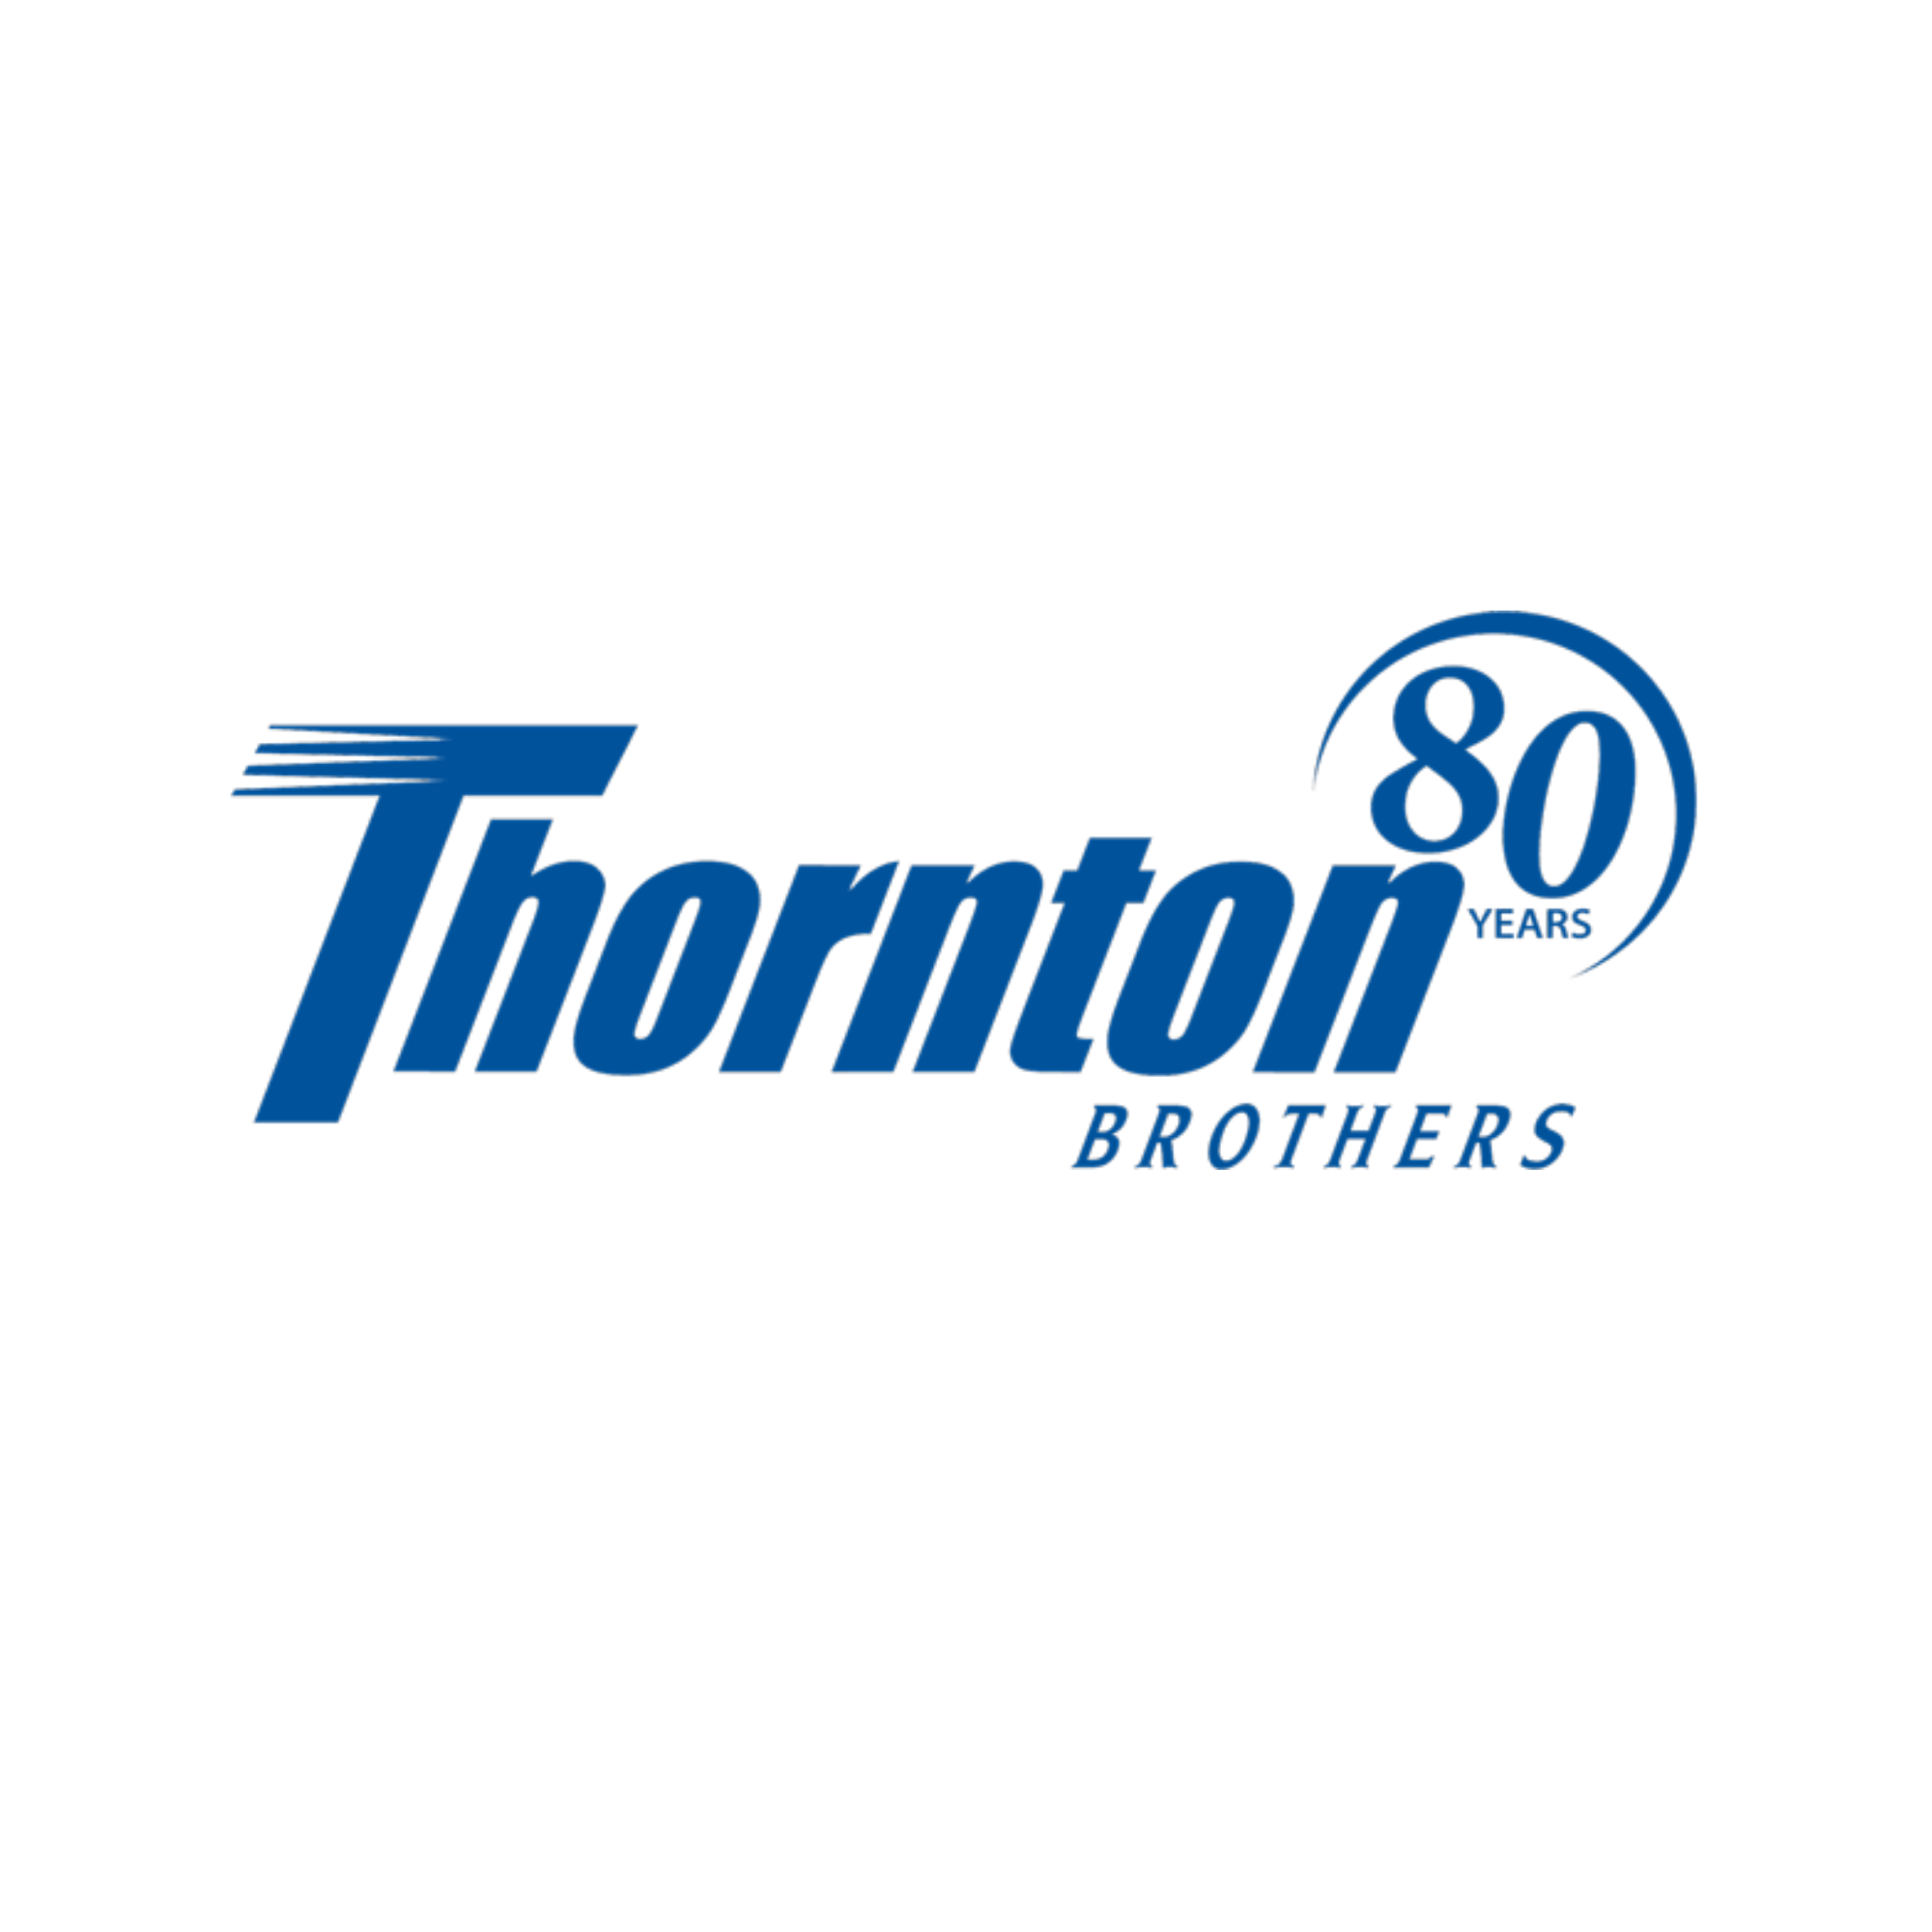 a white background with blue text saying thorton brothers